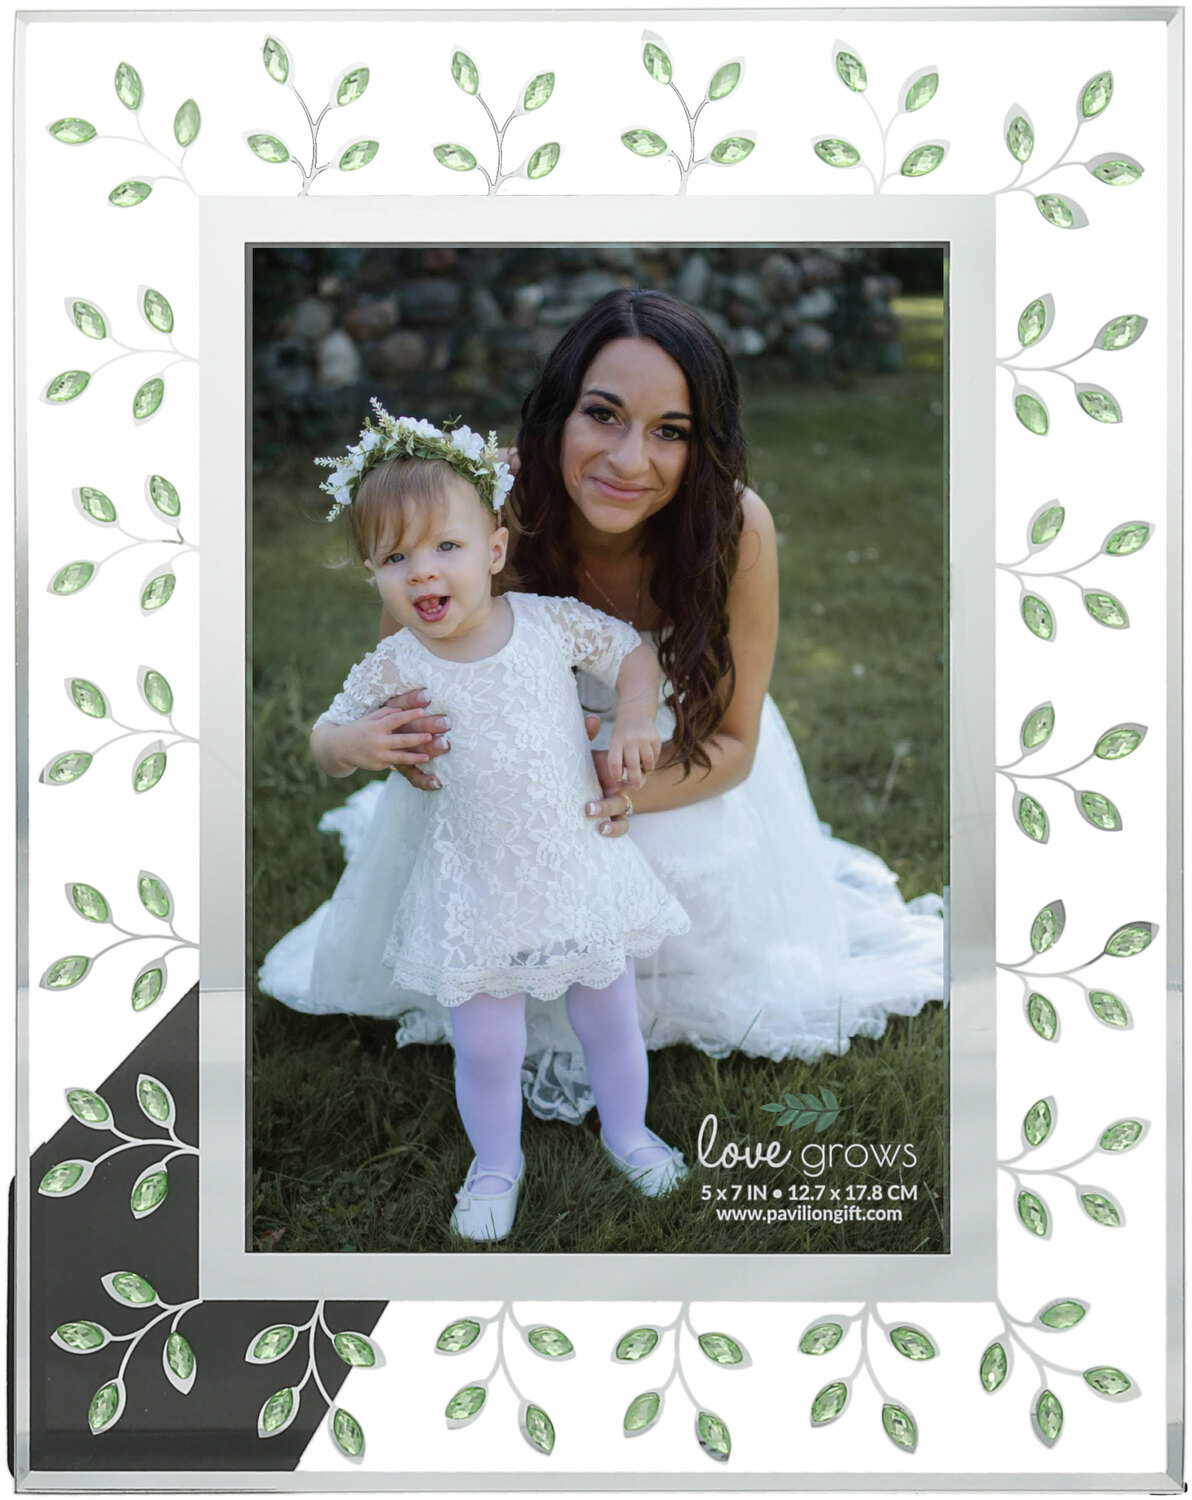 Green Gems by Love Grows - Green Gems - 8" x 10" Frame
(Holds 5" x 7" Photo)